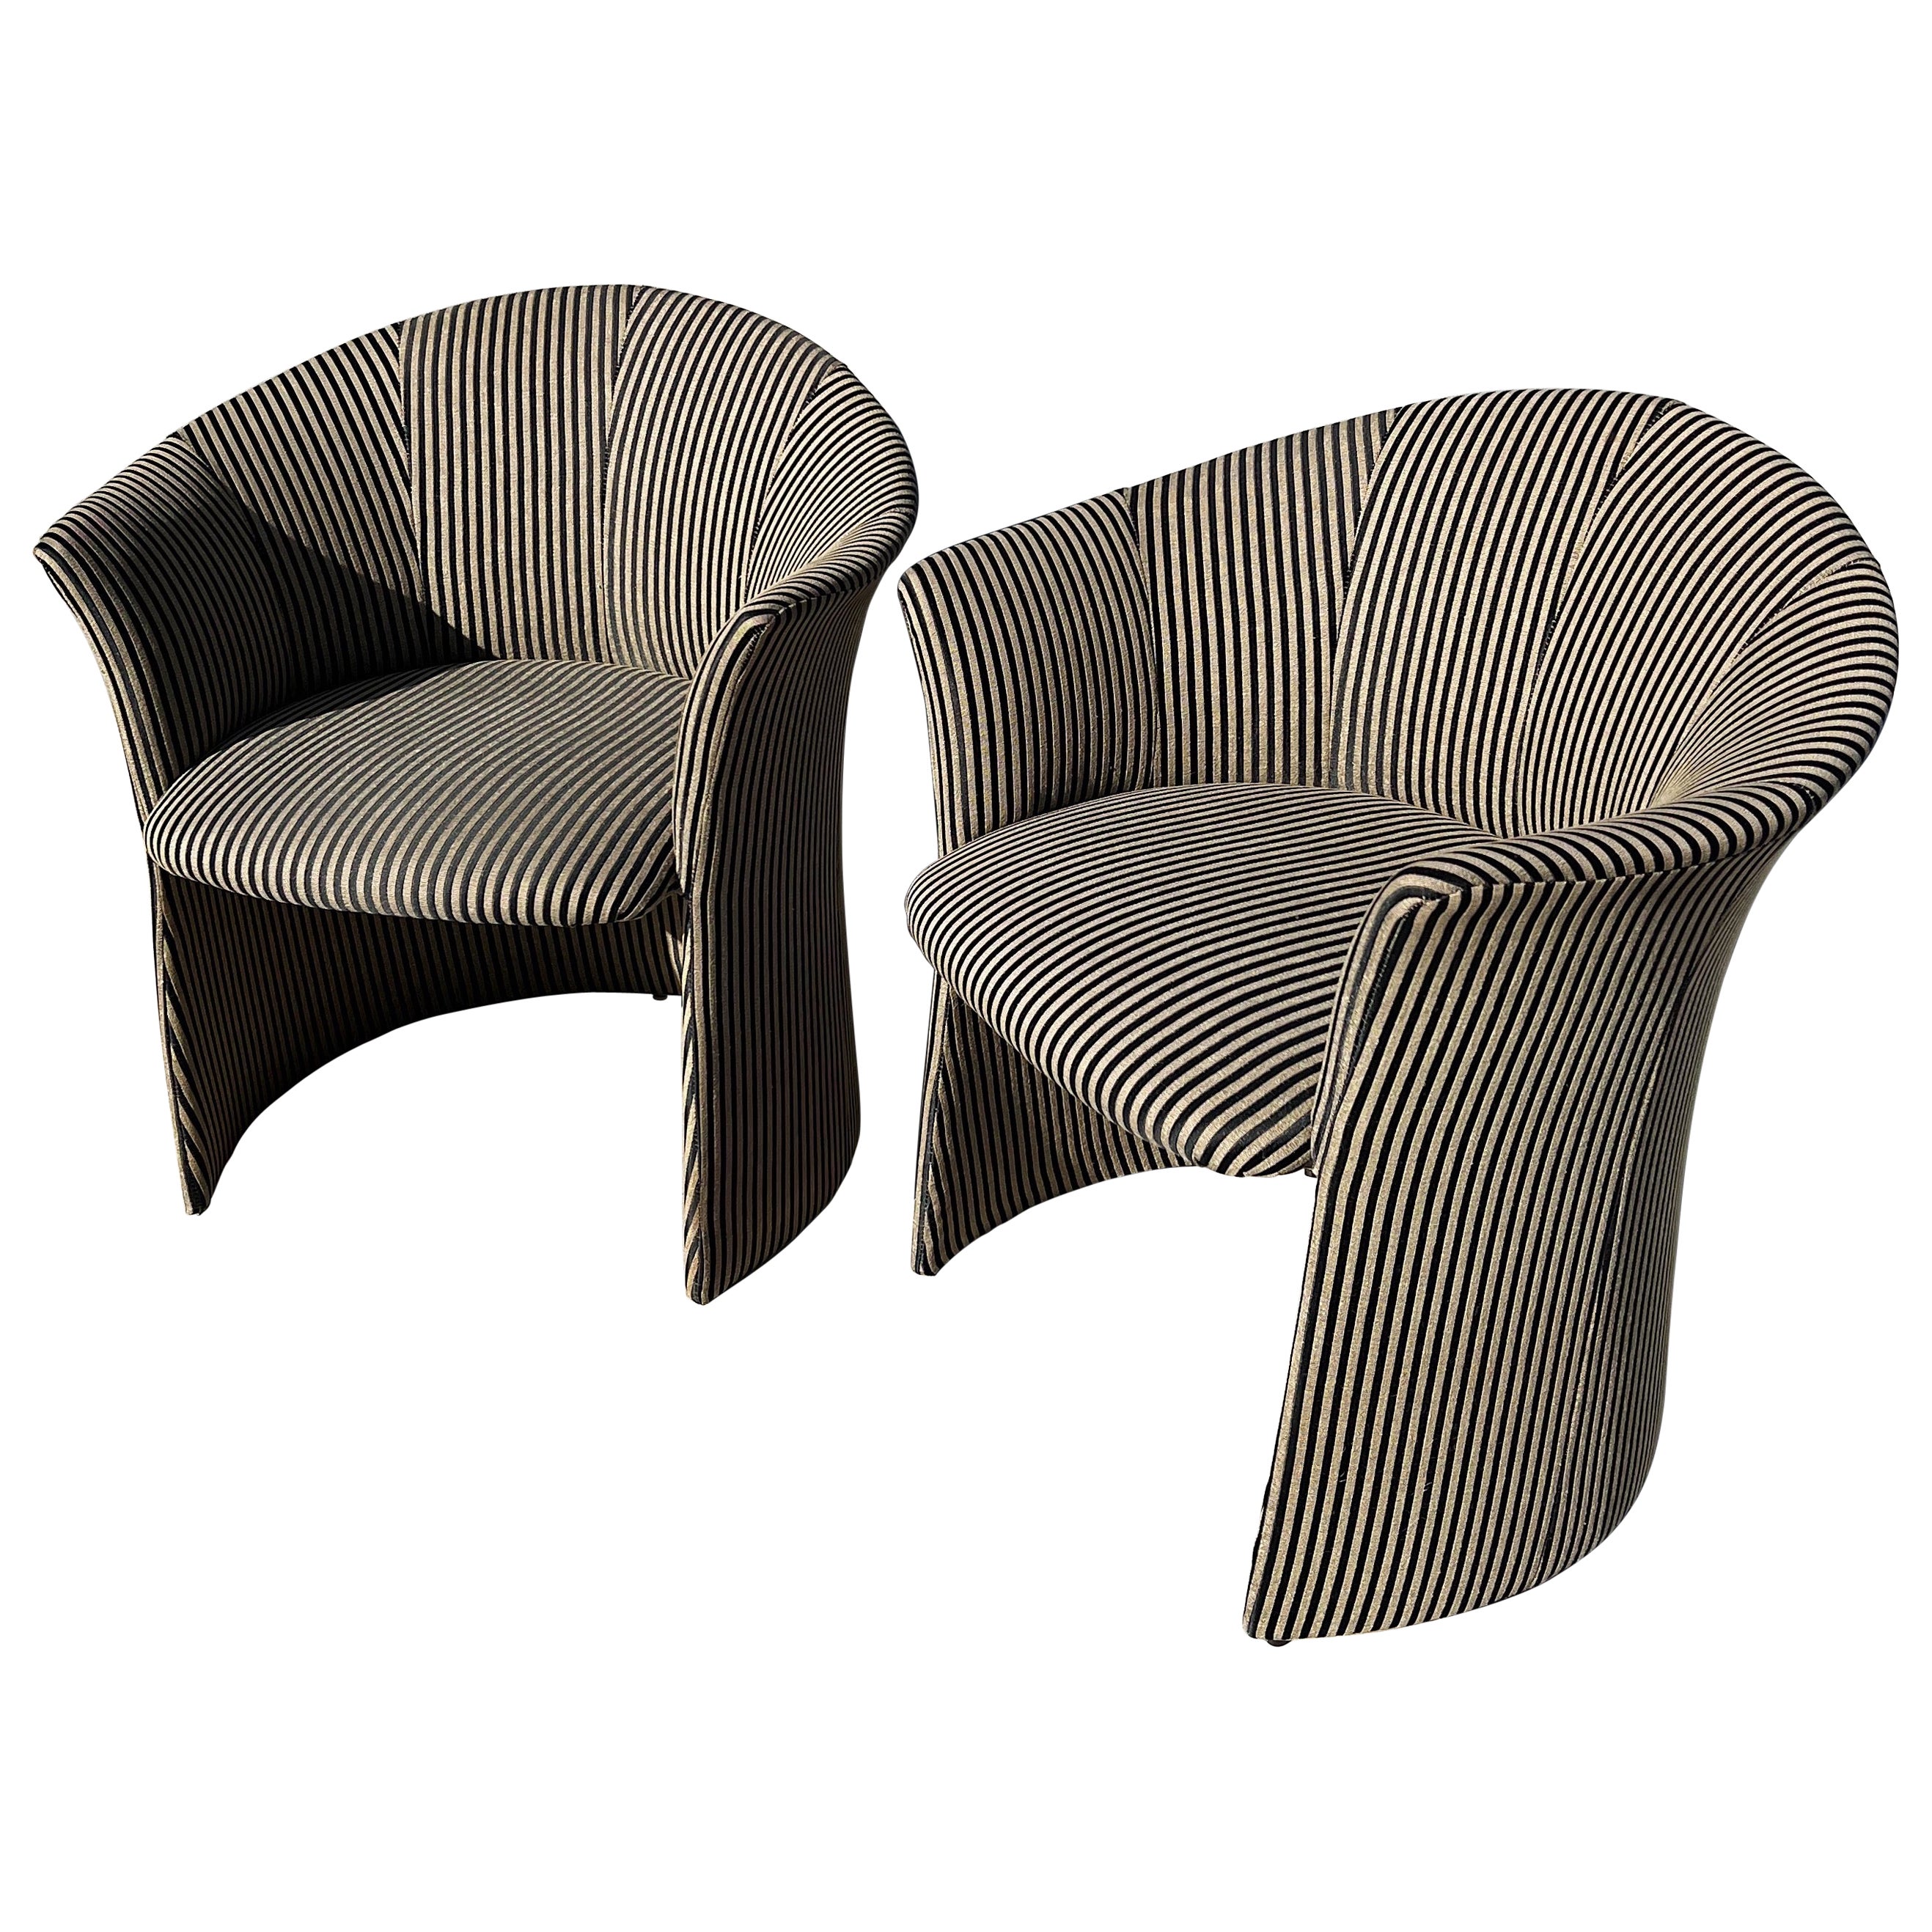 Vintage Pair of Striped Chairs, Attributed to Roche Bobois 